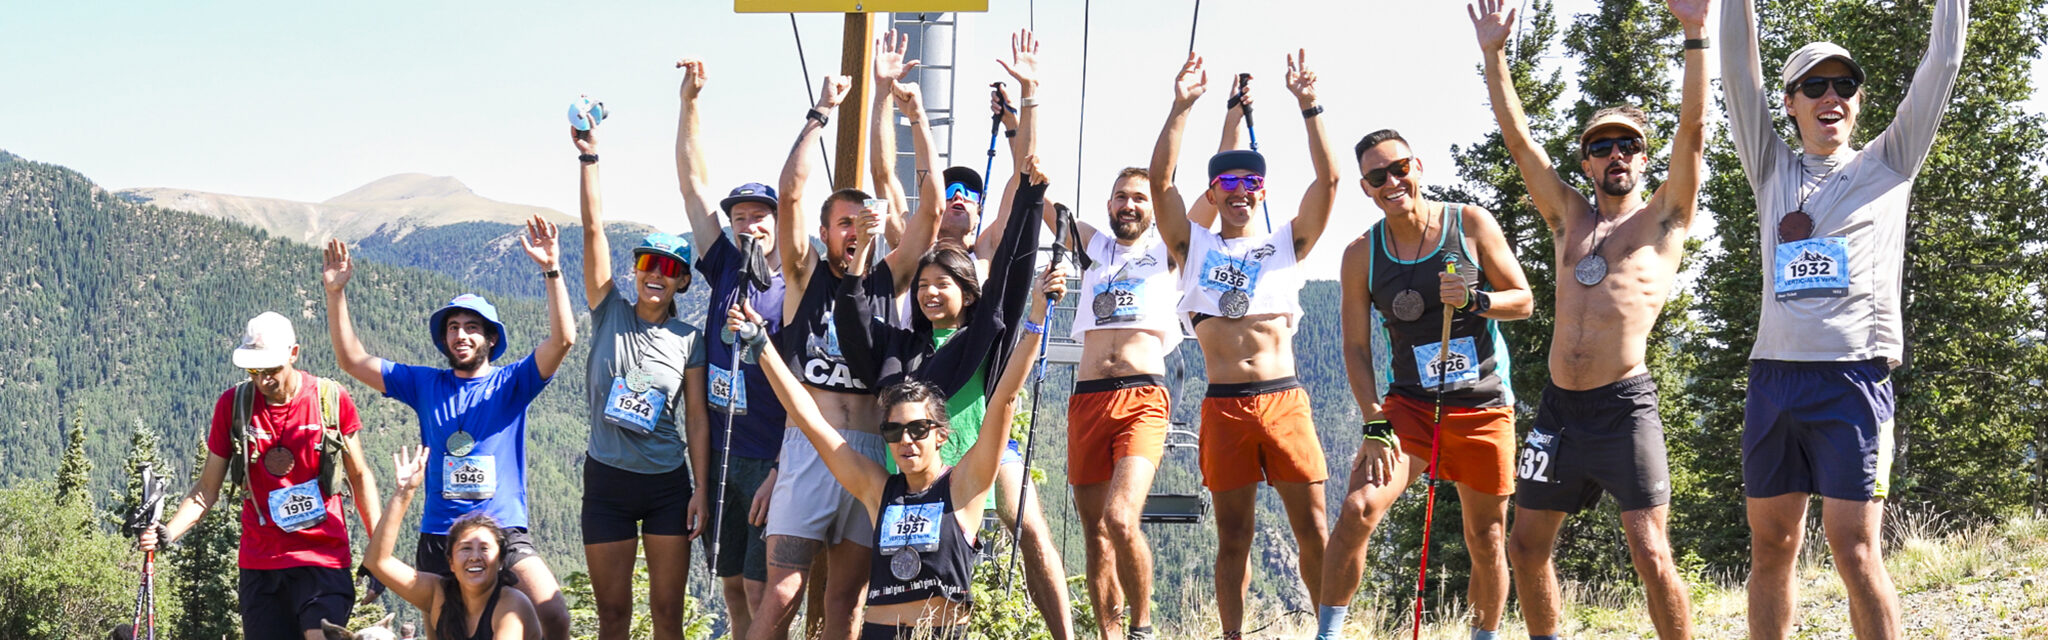 A group of runners stand at the finish line on top of a mountain with their arms raised in the air.